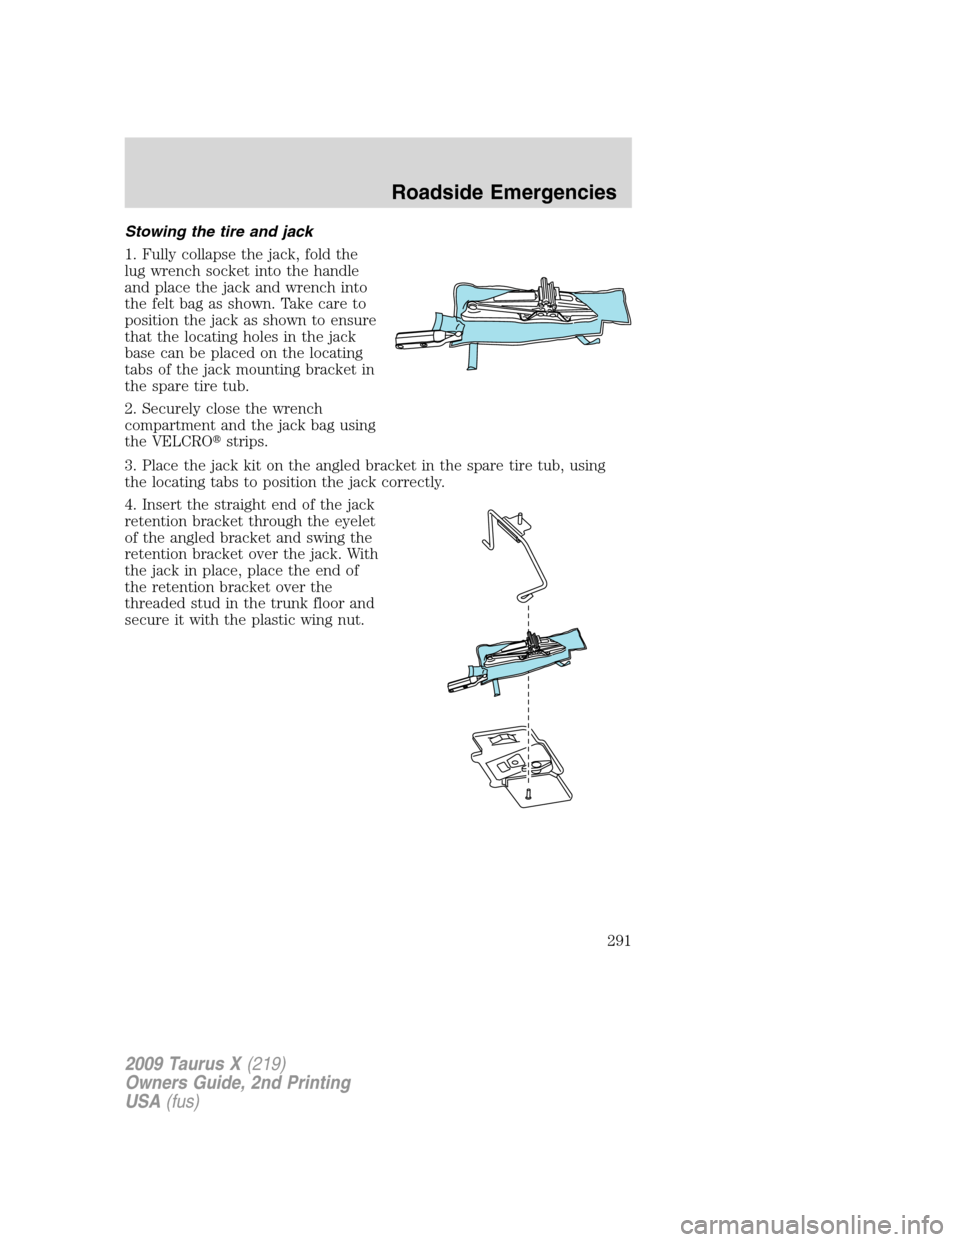 FORD TAURUS X 2009 1.G User Guide Stowing the tire and jack
1. Fully collapse the jack, fold the
lug wrench socket into the handle
and place the jack and wrench into
the felt bag as shown. Take care to
position the jack as shown to en